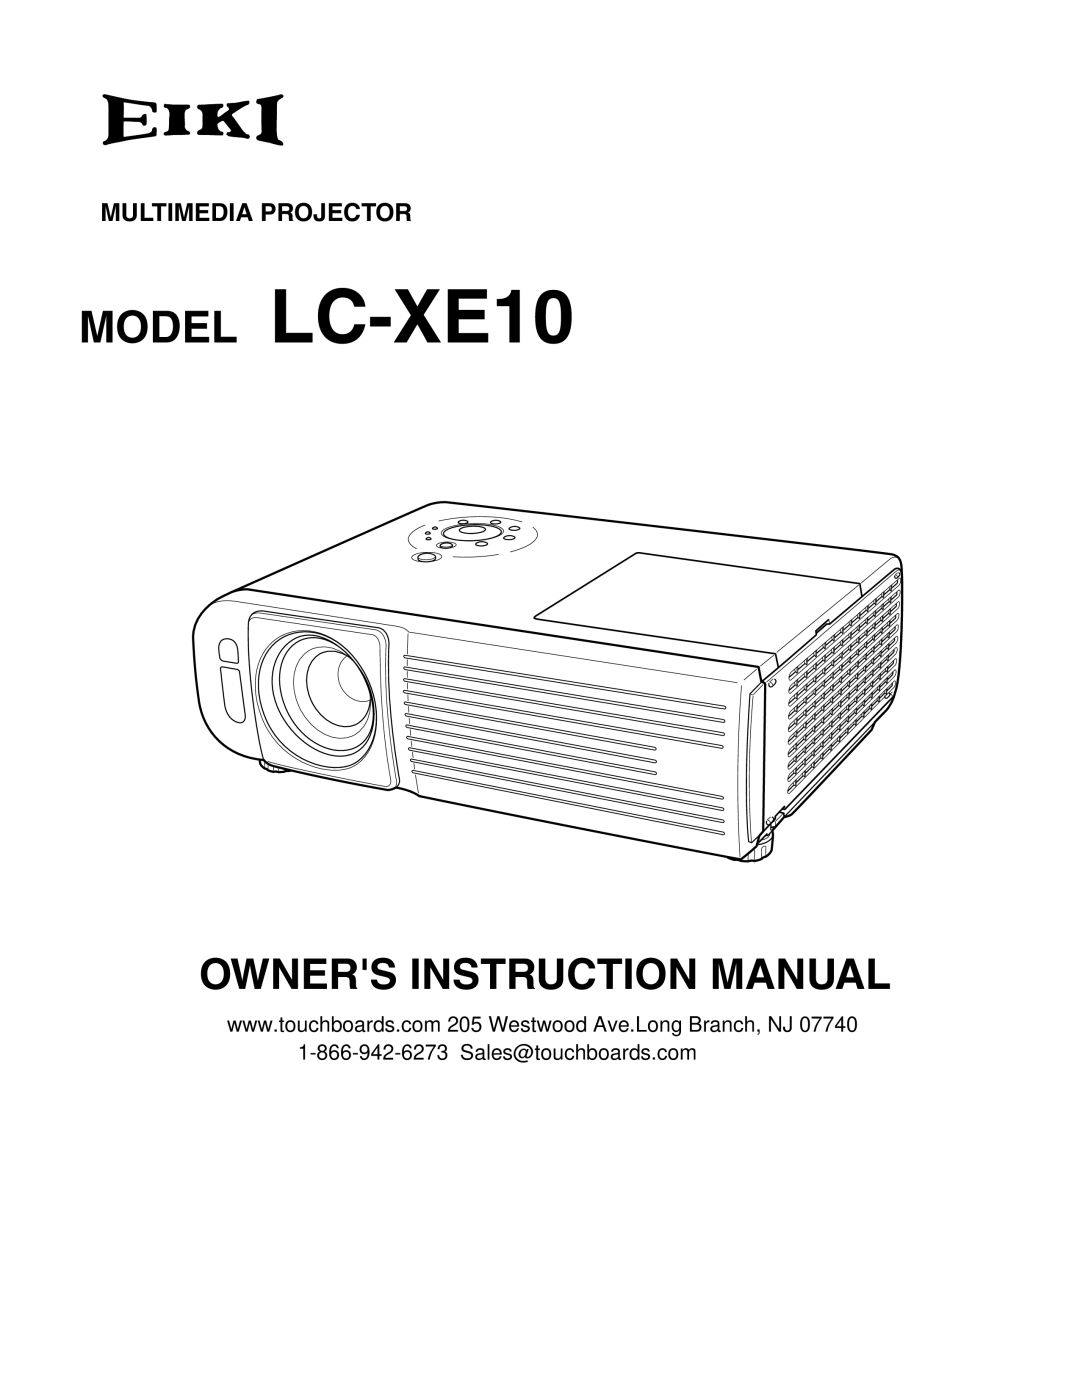 Black Box instruction manual MODEL LC-XE10, Owners Instruction Manual, Multimedia Projector 